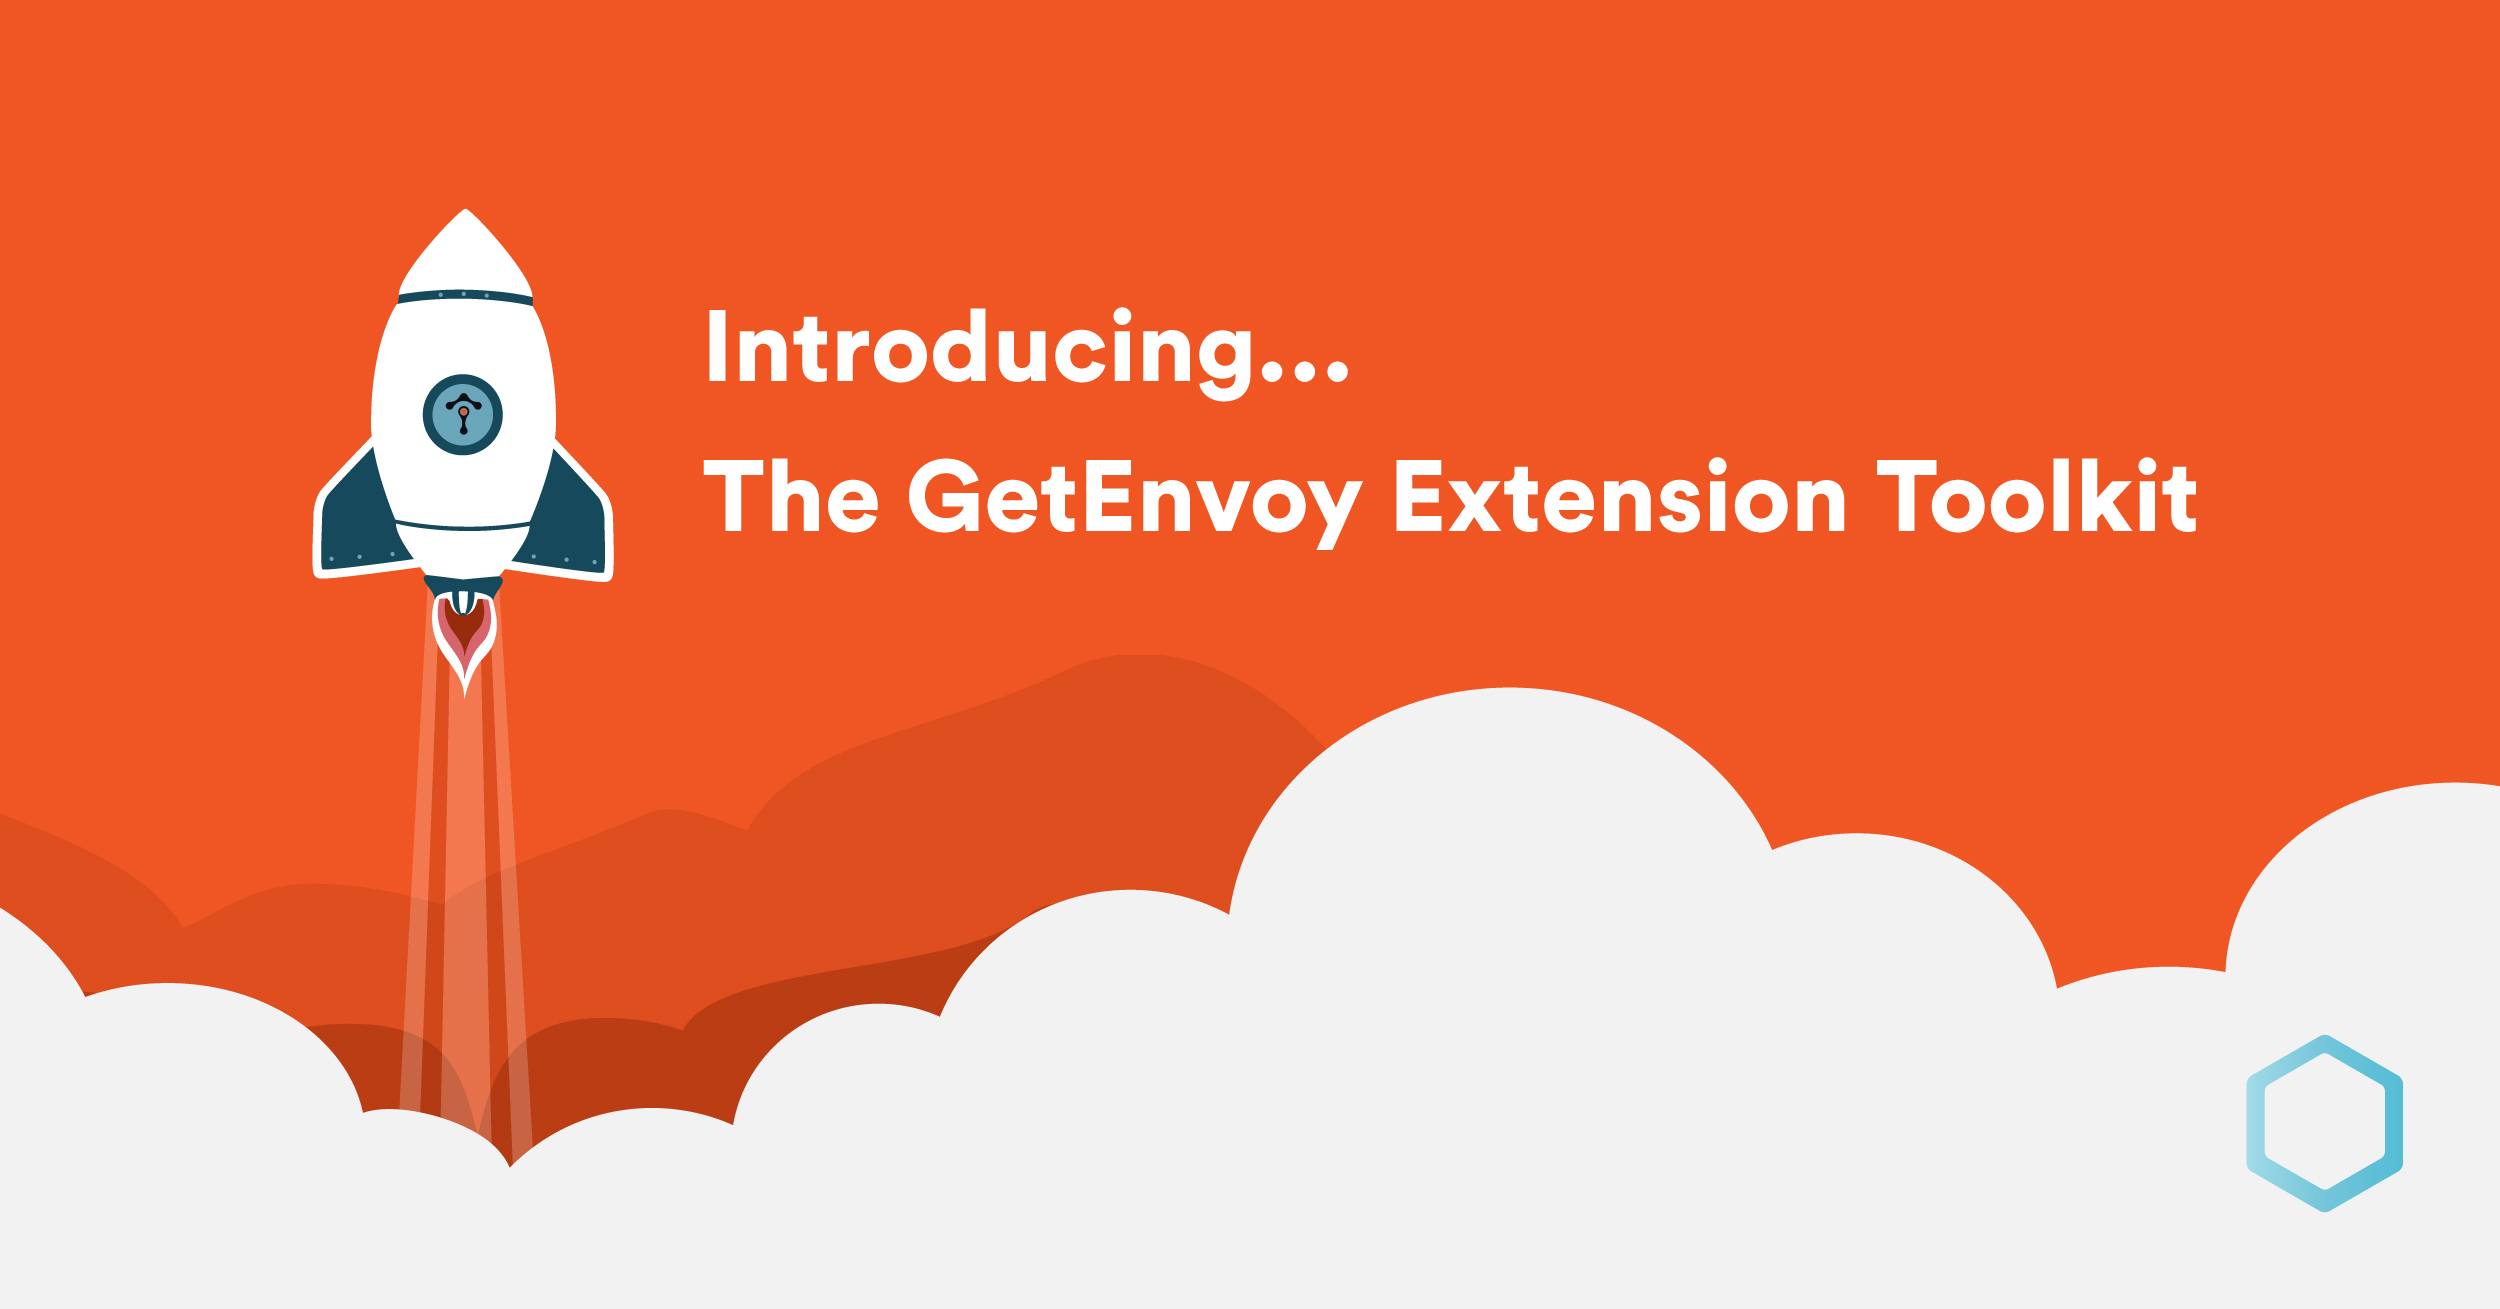 Introducing the GetEnvoy Extension Toolkit